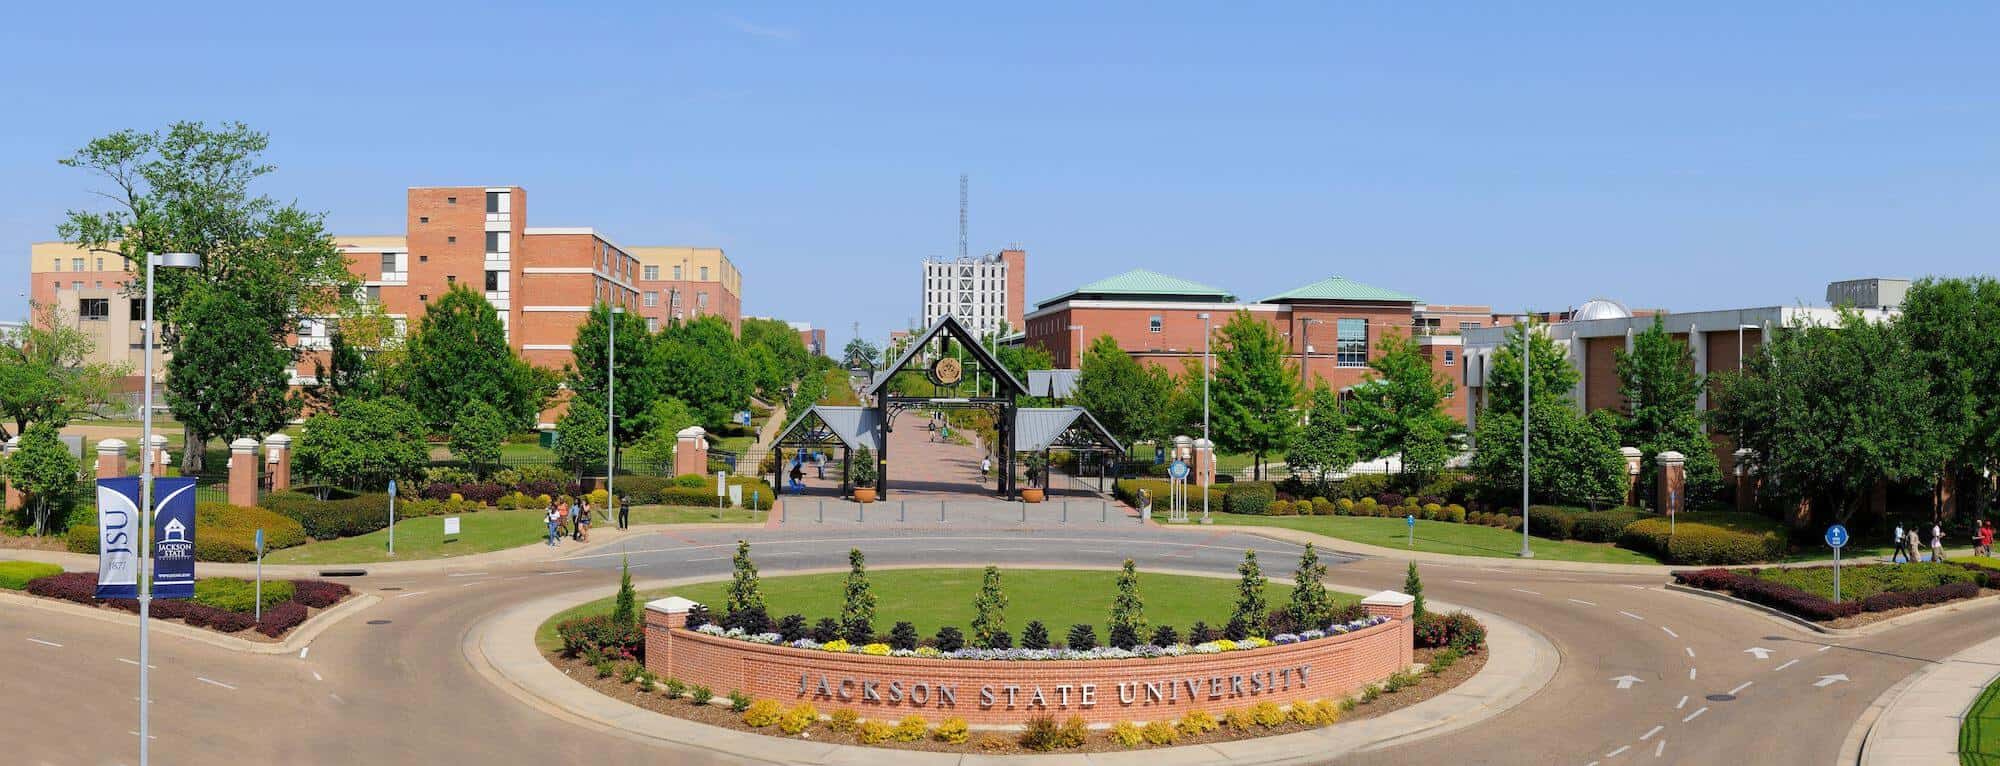 Jackson State University Rankings, Tuition, Acceptance Rate, etc.